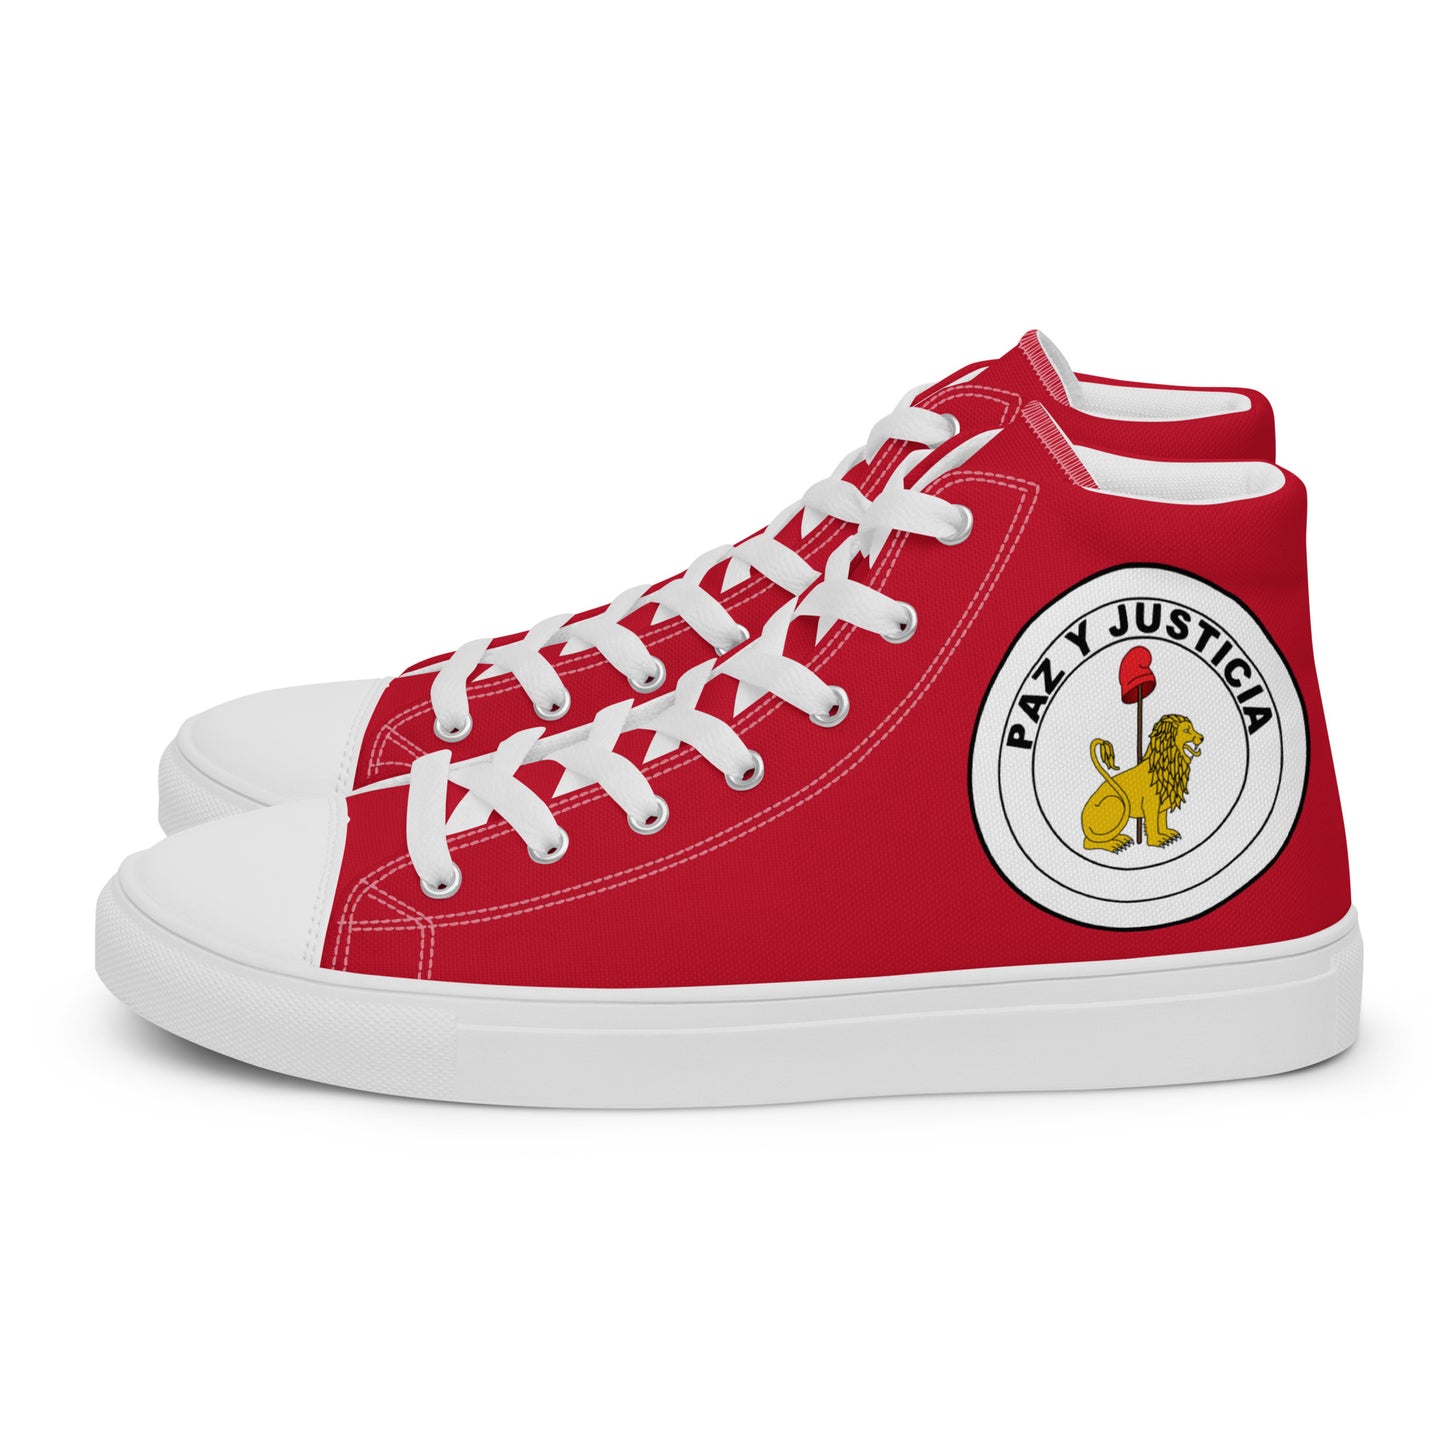 Paraguay - Men - Red - High top shoes